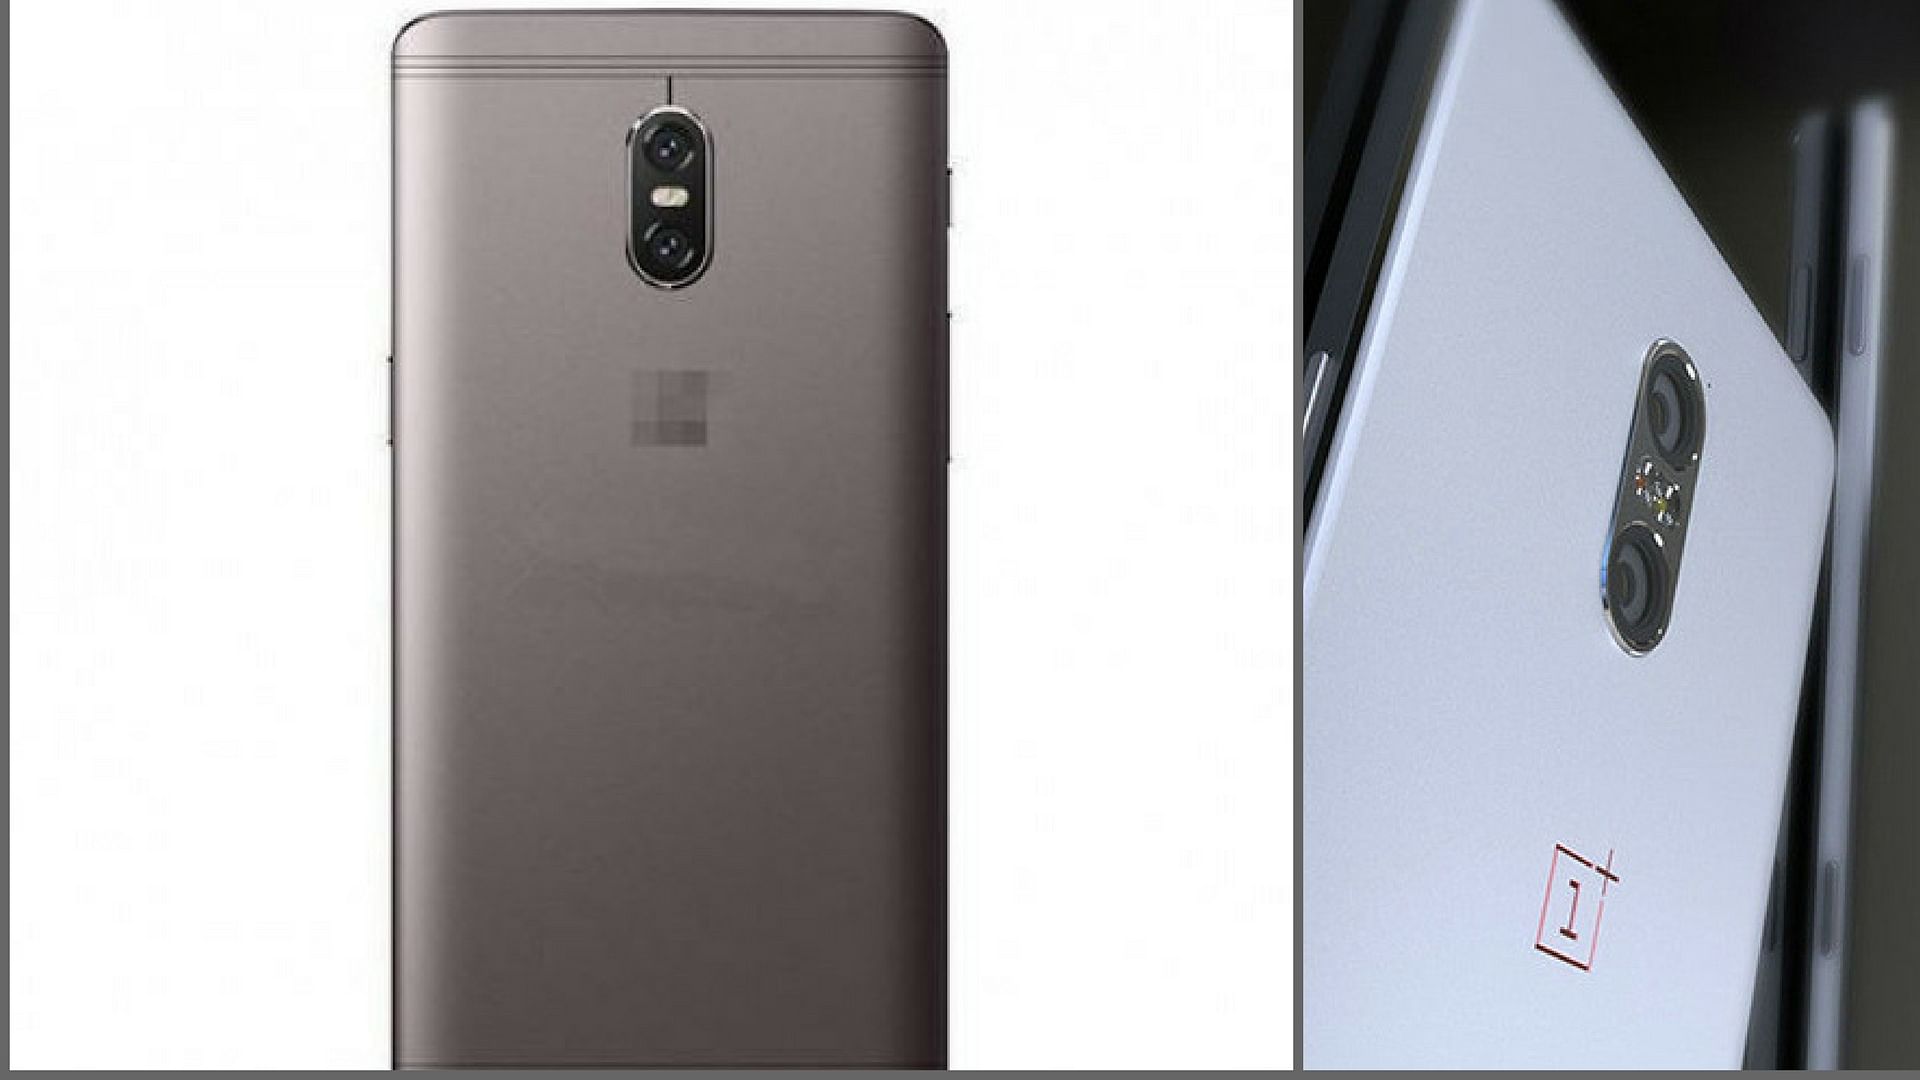 Rumours suggest there will be a dual camera setup on the phone. (Photo courtesy: <a href="http://http://www.slashleaks.com/wp-content/uploads/thumbnail/crop.php?src=http://www.slashleaks.com/wp-content/uploads/oneplus%205%20alleged%20render%20leaked.jpg&amp;h=555&amp;w=750">slashleaks.com</a>)